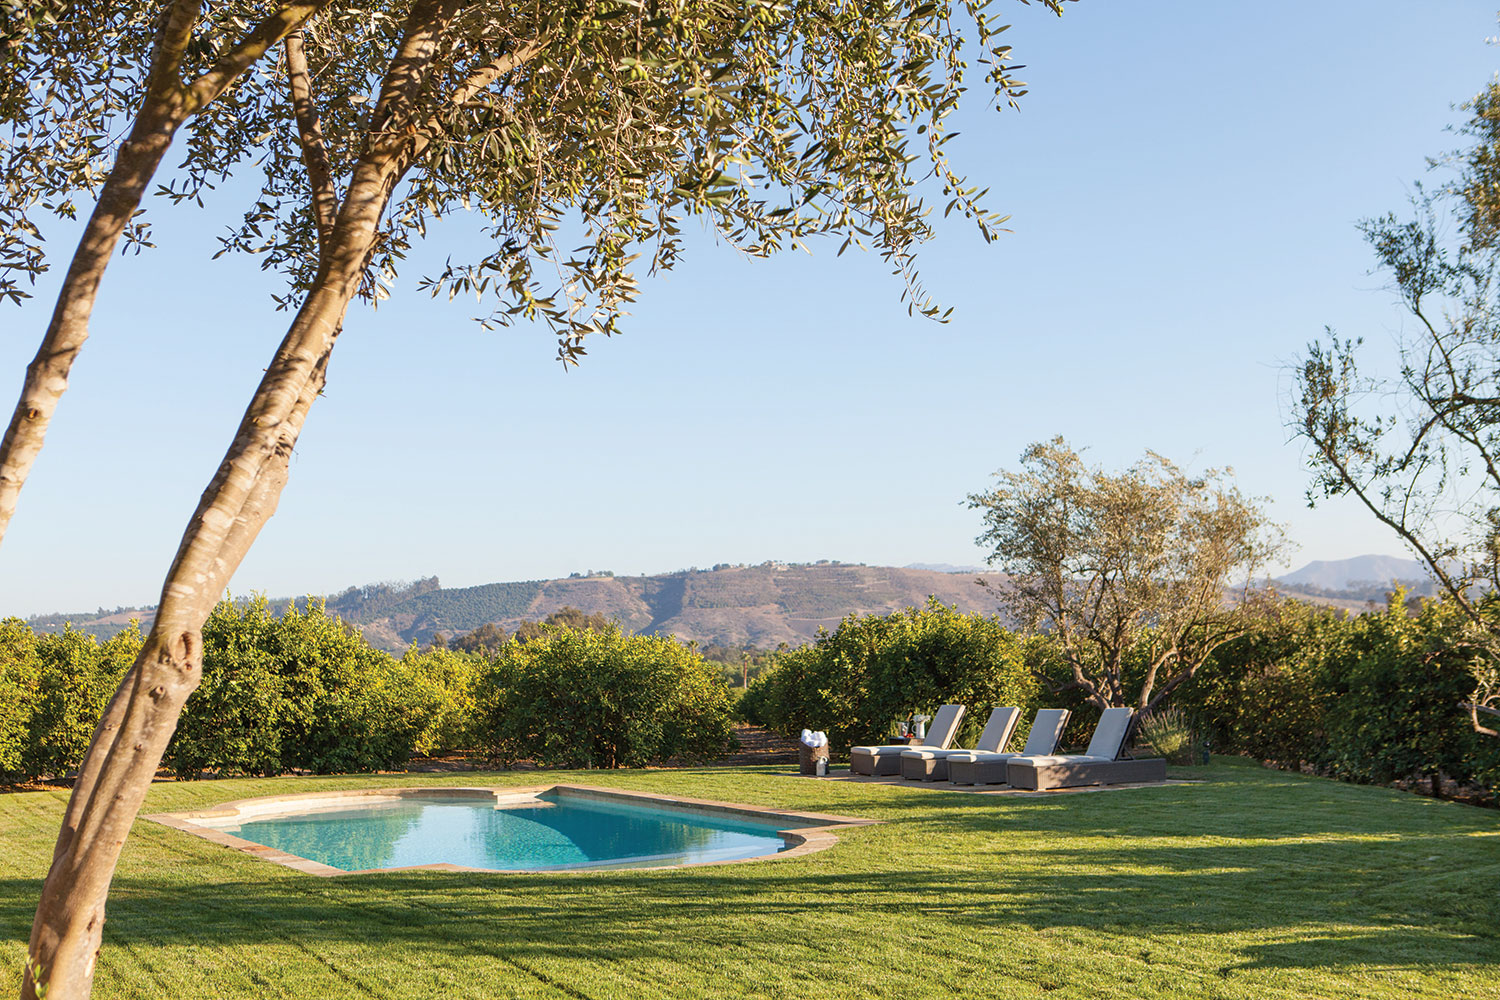 Views of rolling hills and lemon groves await those lucky enough to be invited for a swim at designer Jennifer Amodei‘s pool